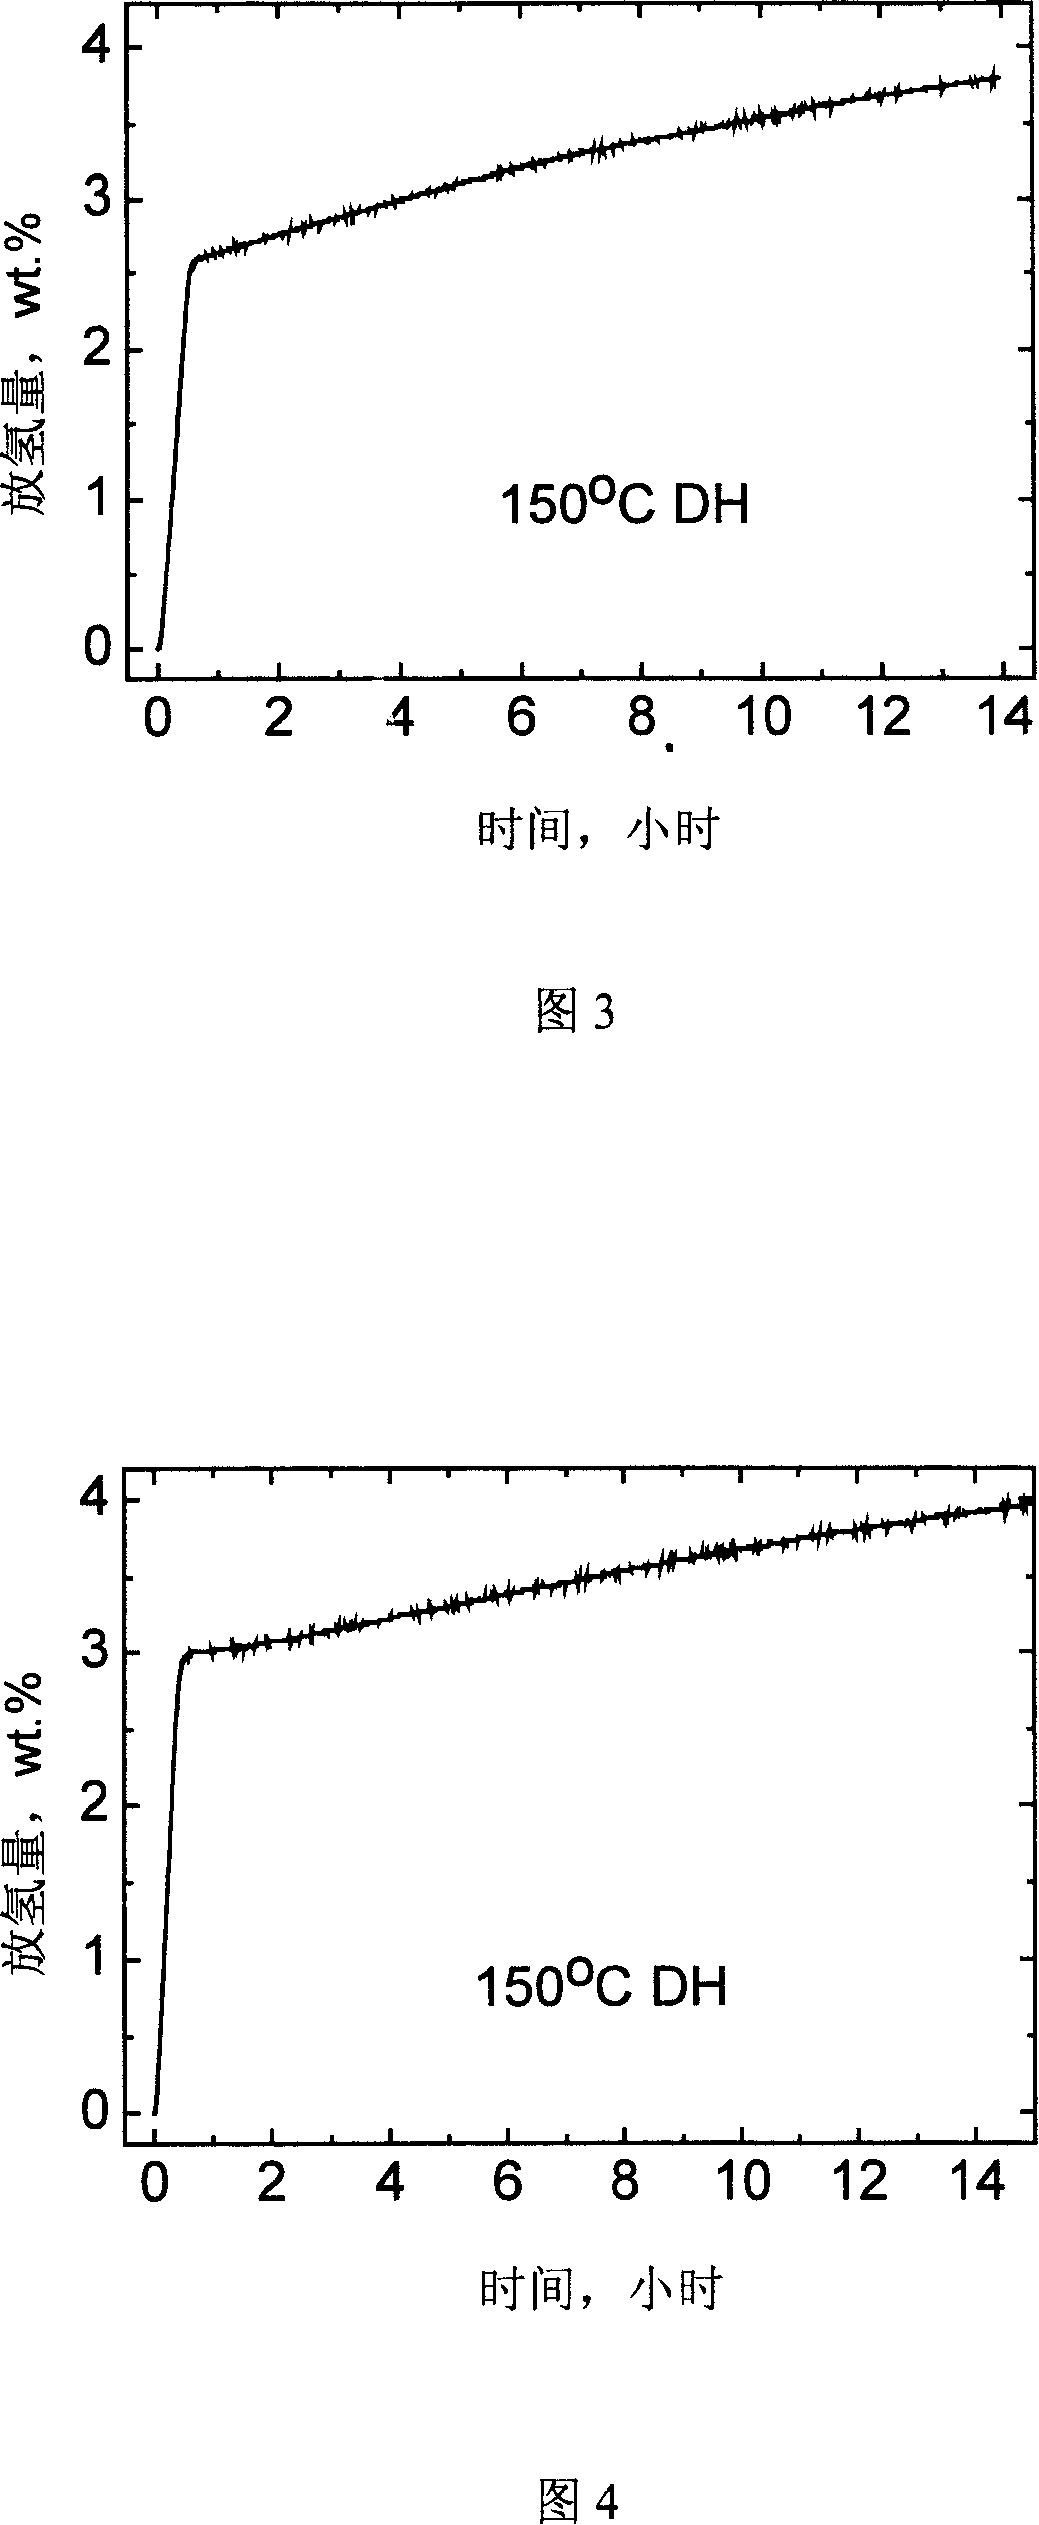 High-capacity hydrogen-storage material with NaAlH4 and preparation method thereof